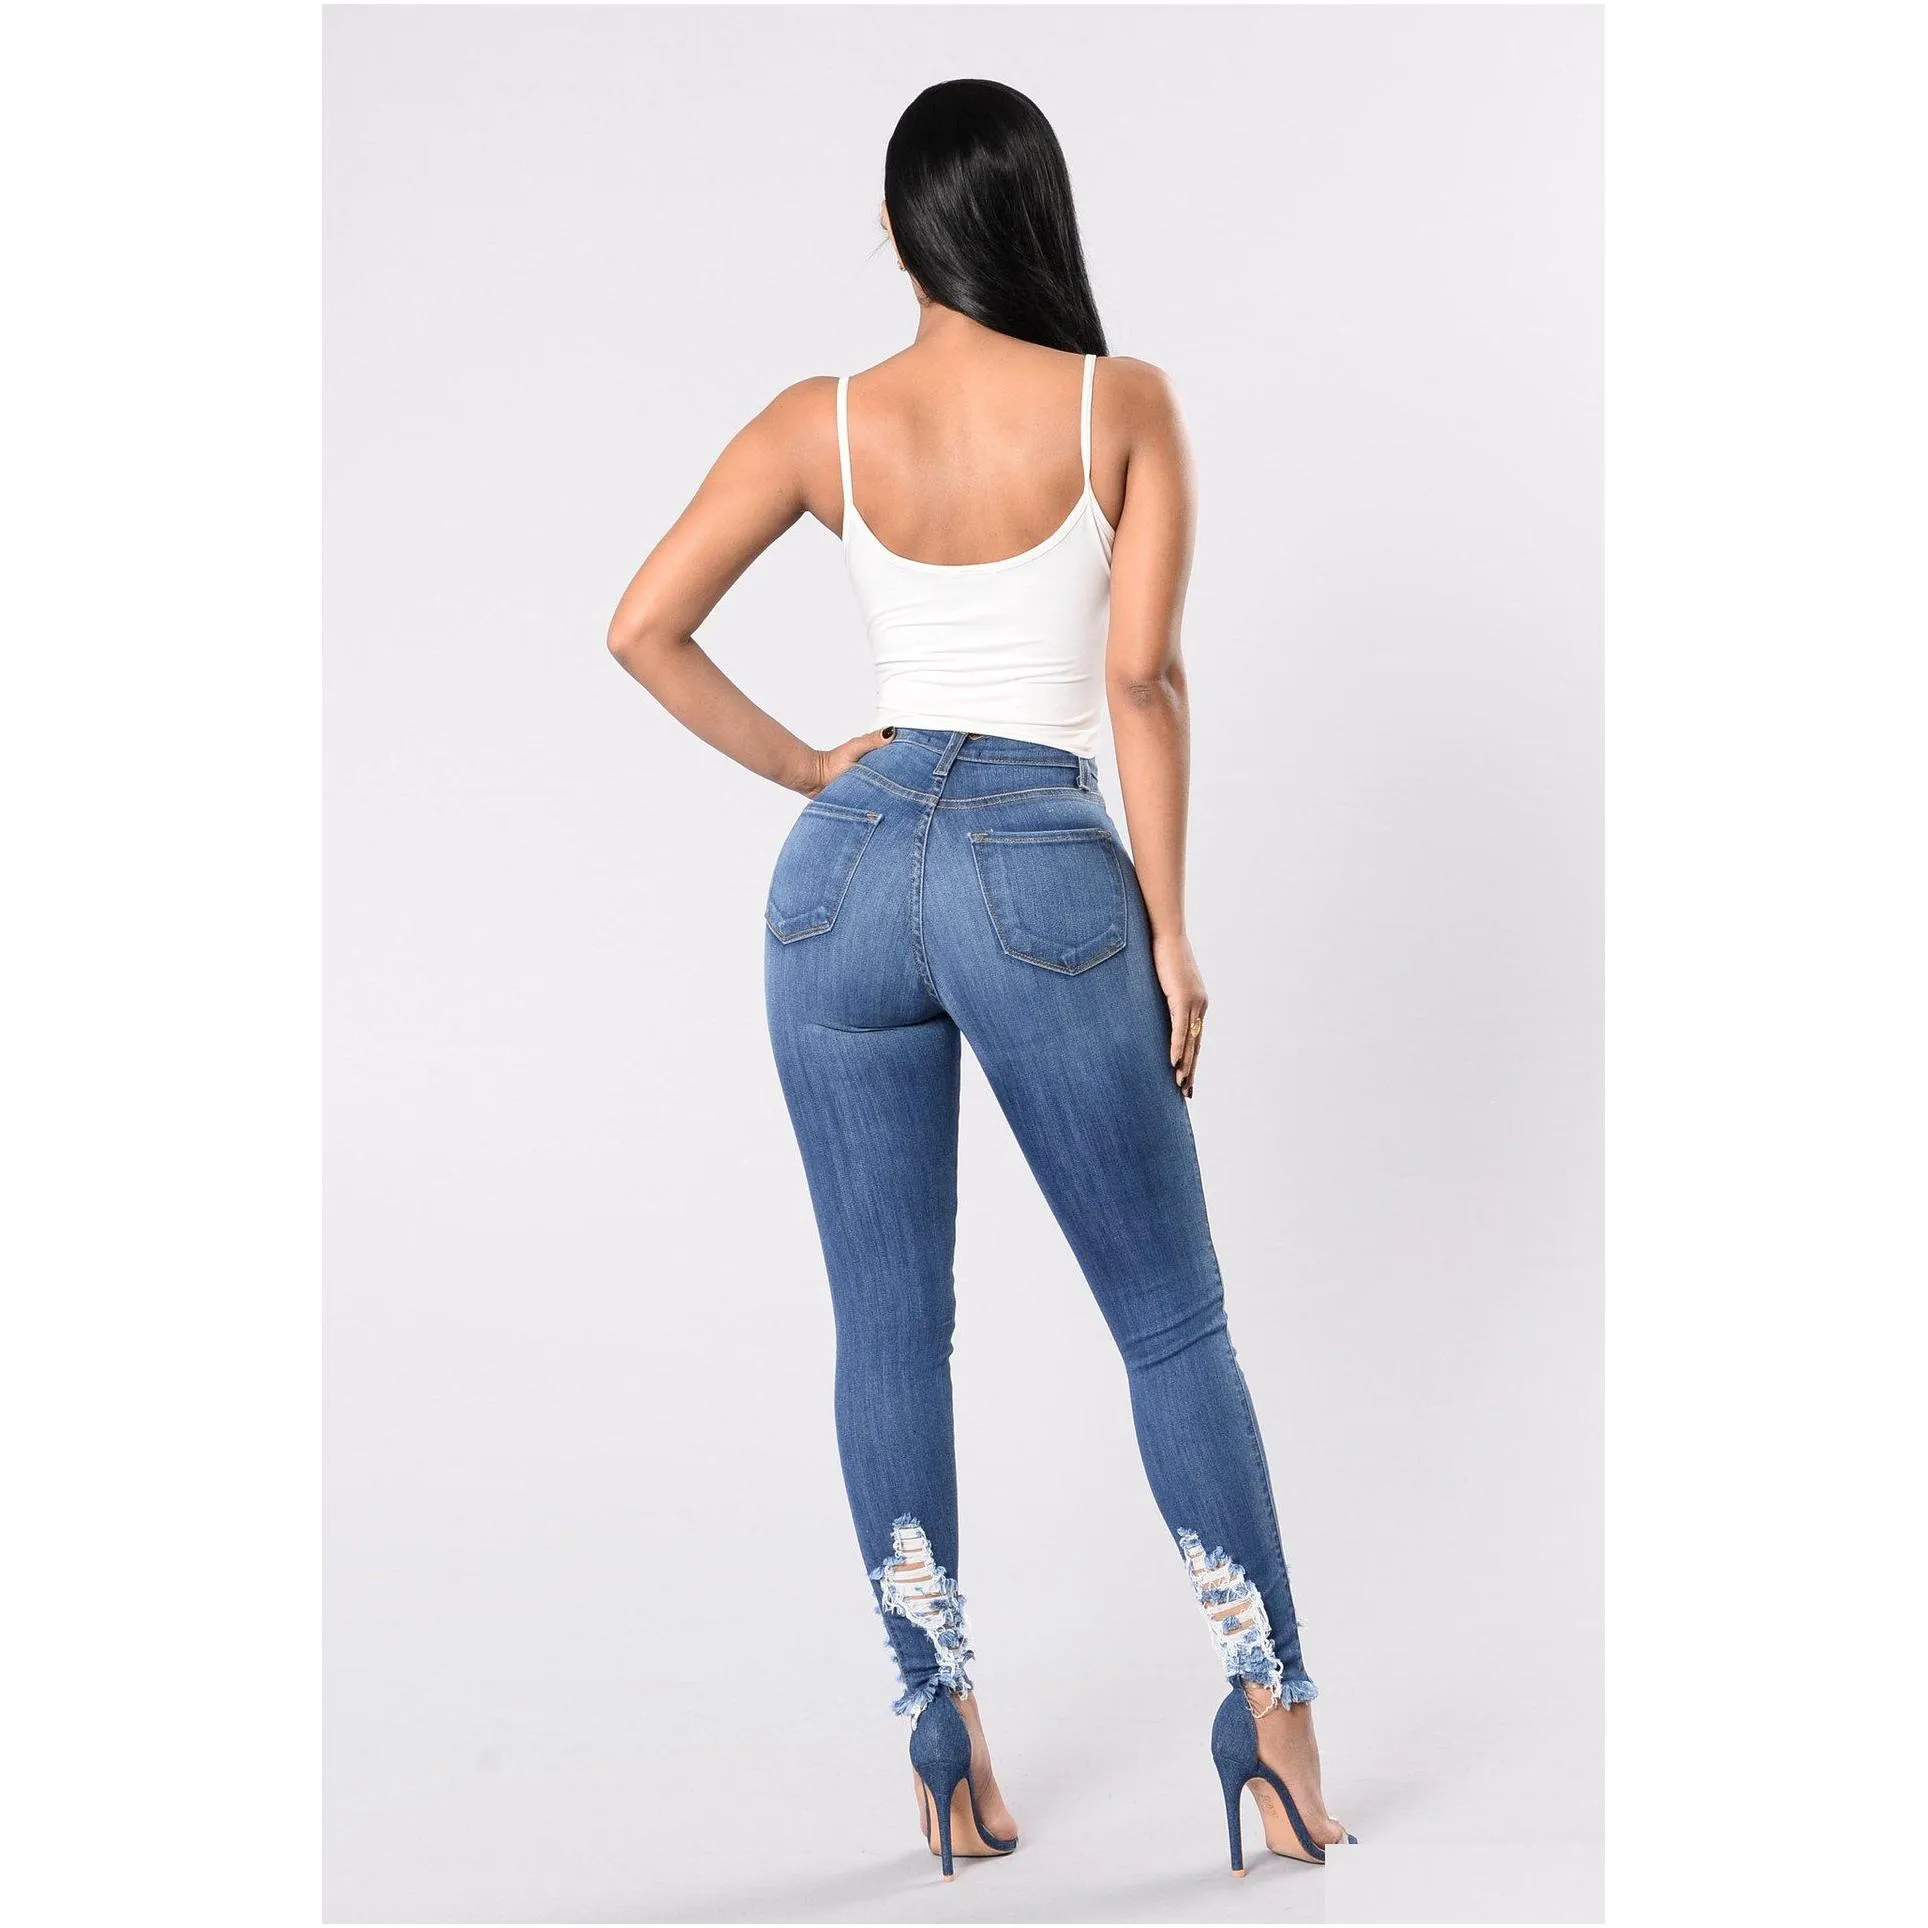 Women`S Jeans Womens High Waisted Women Blue Elastic Waist Hole Strap Pants Rise Clothes Valentine Gift Drop Delivery Apparel Clothin Dhtoc